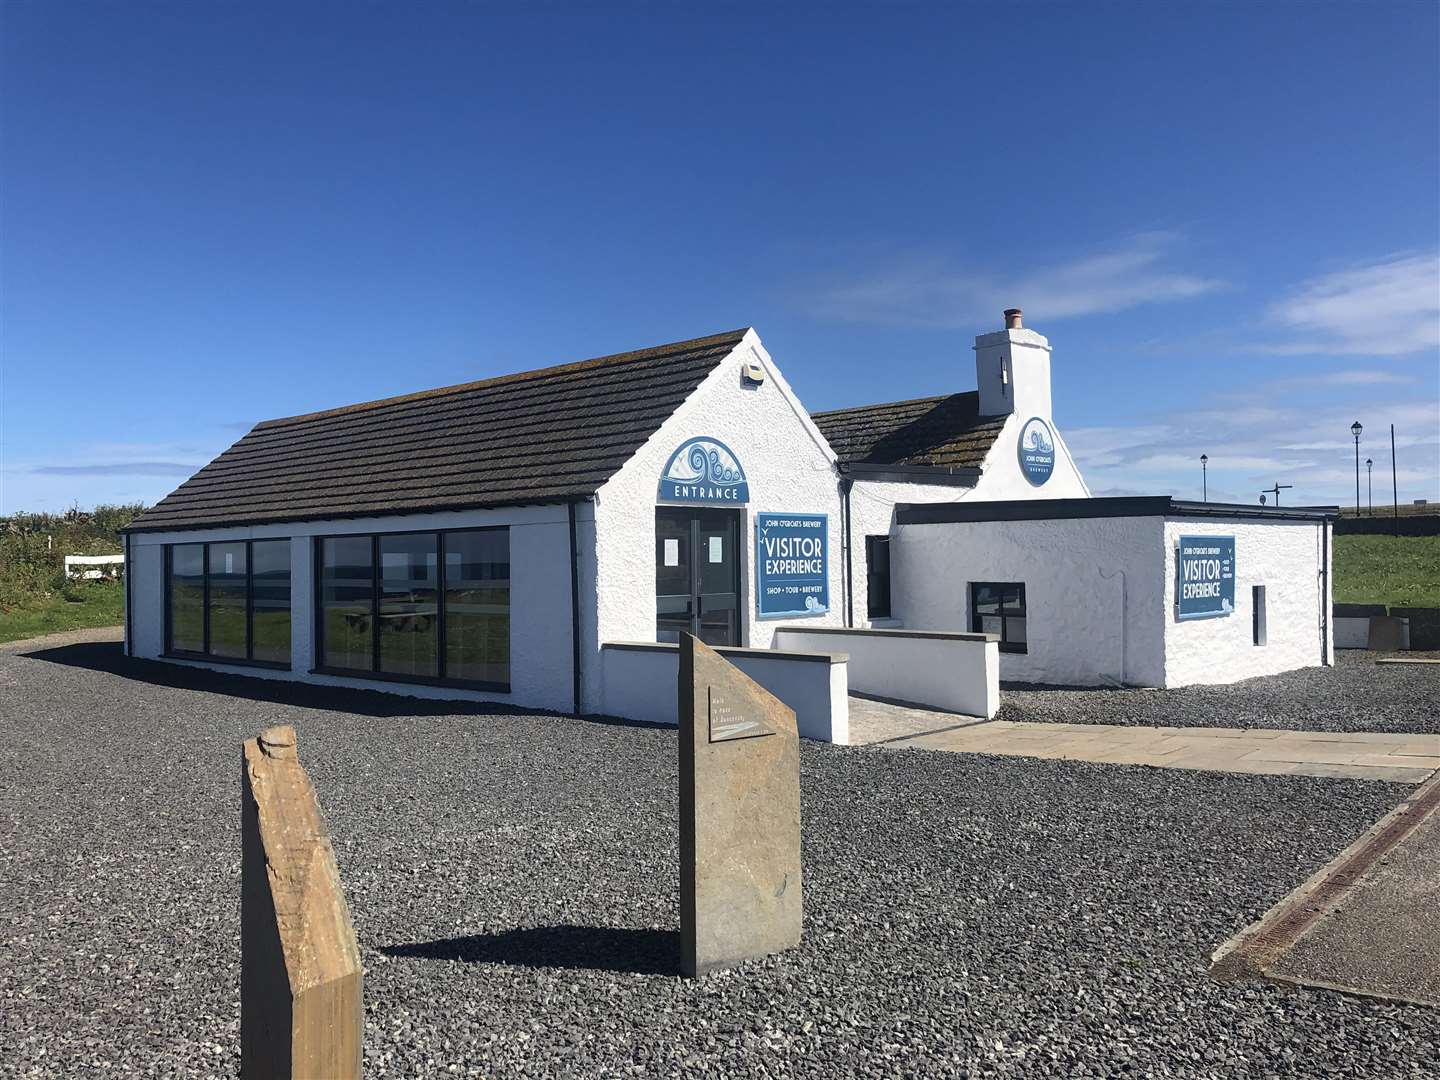 The new visitor centre at John o' Groats Brewery.